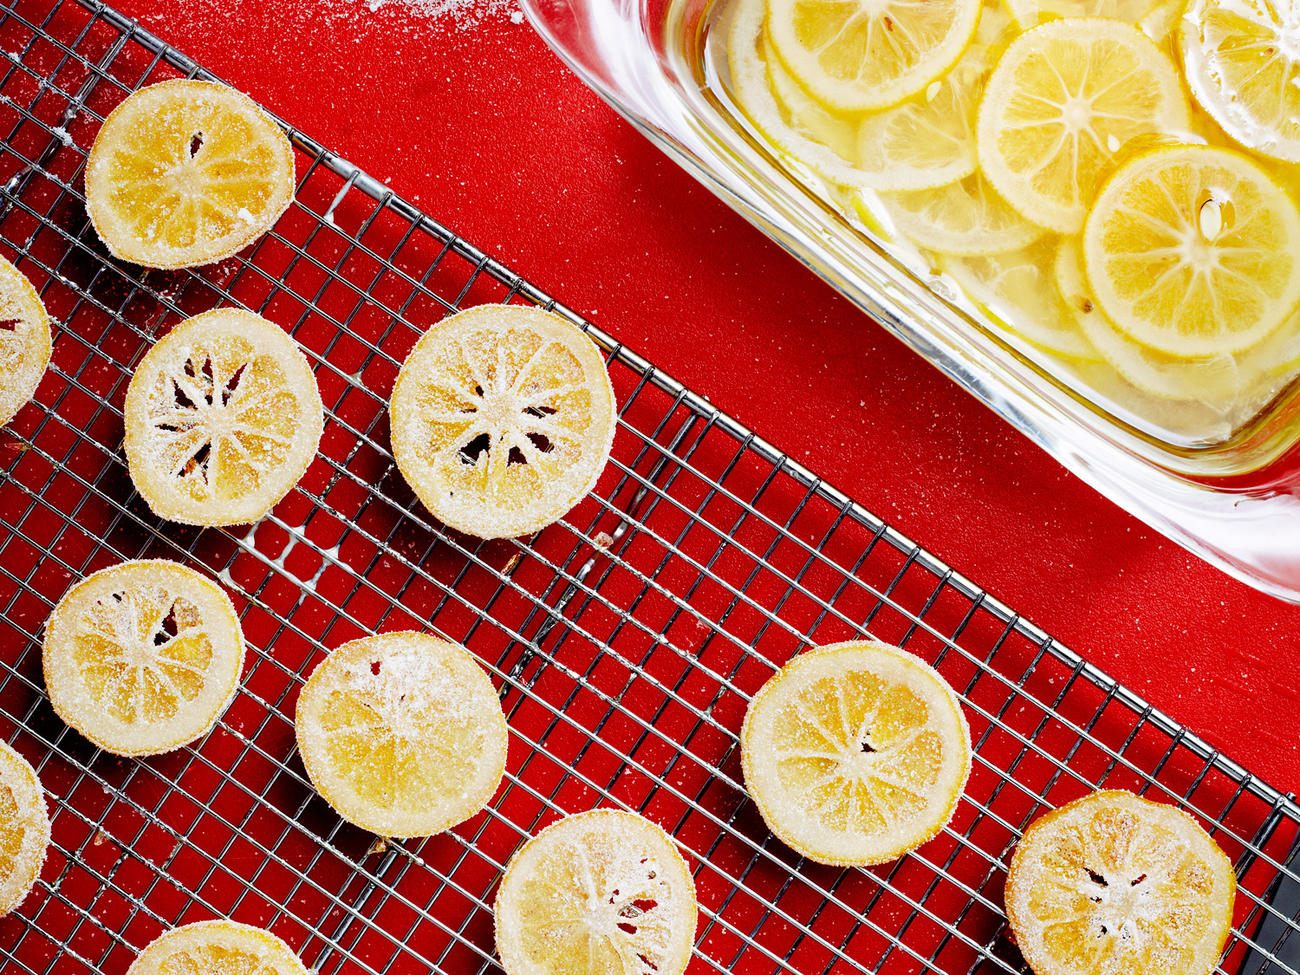 Now Is the Time to Use Winter Citrus. Here Are Our Favorite Recipes